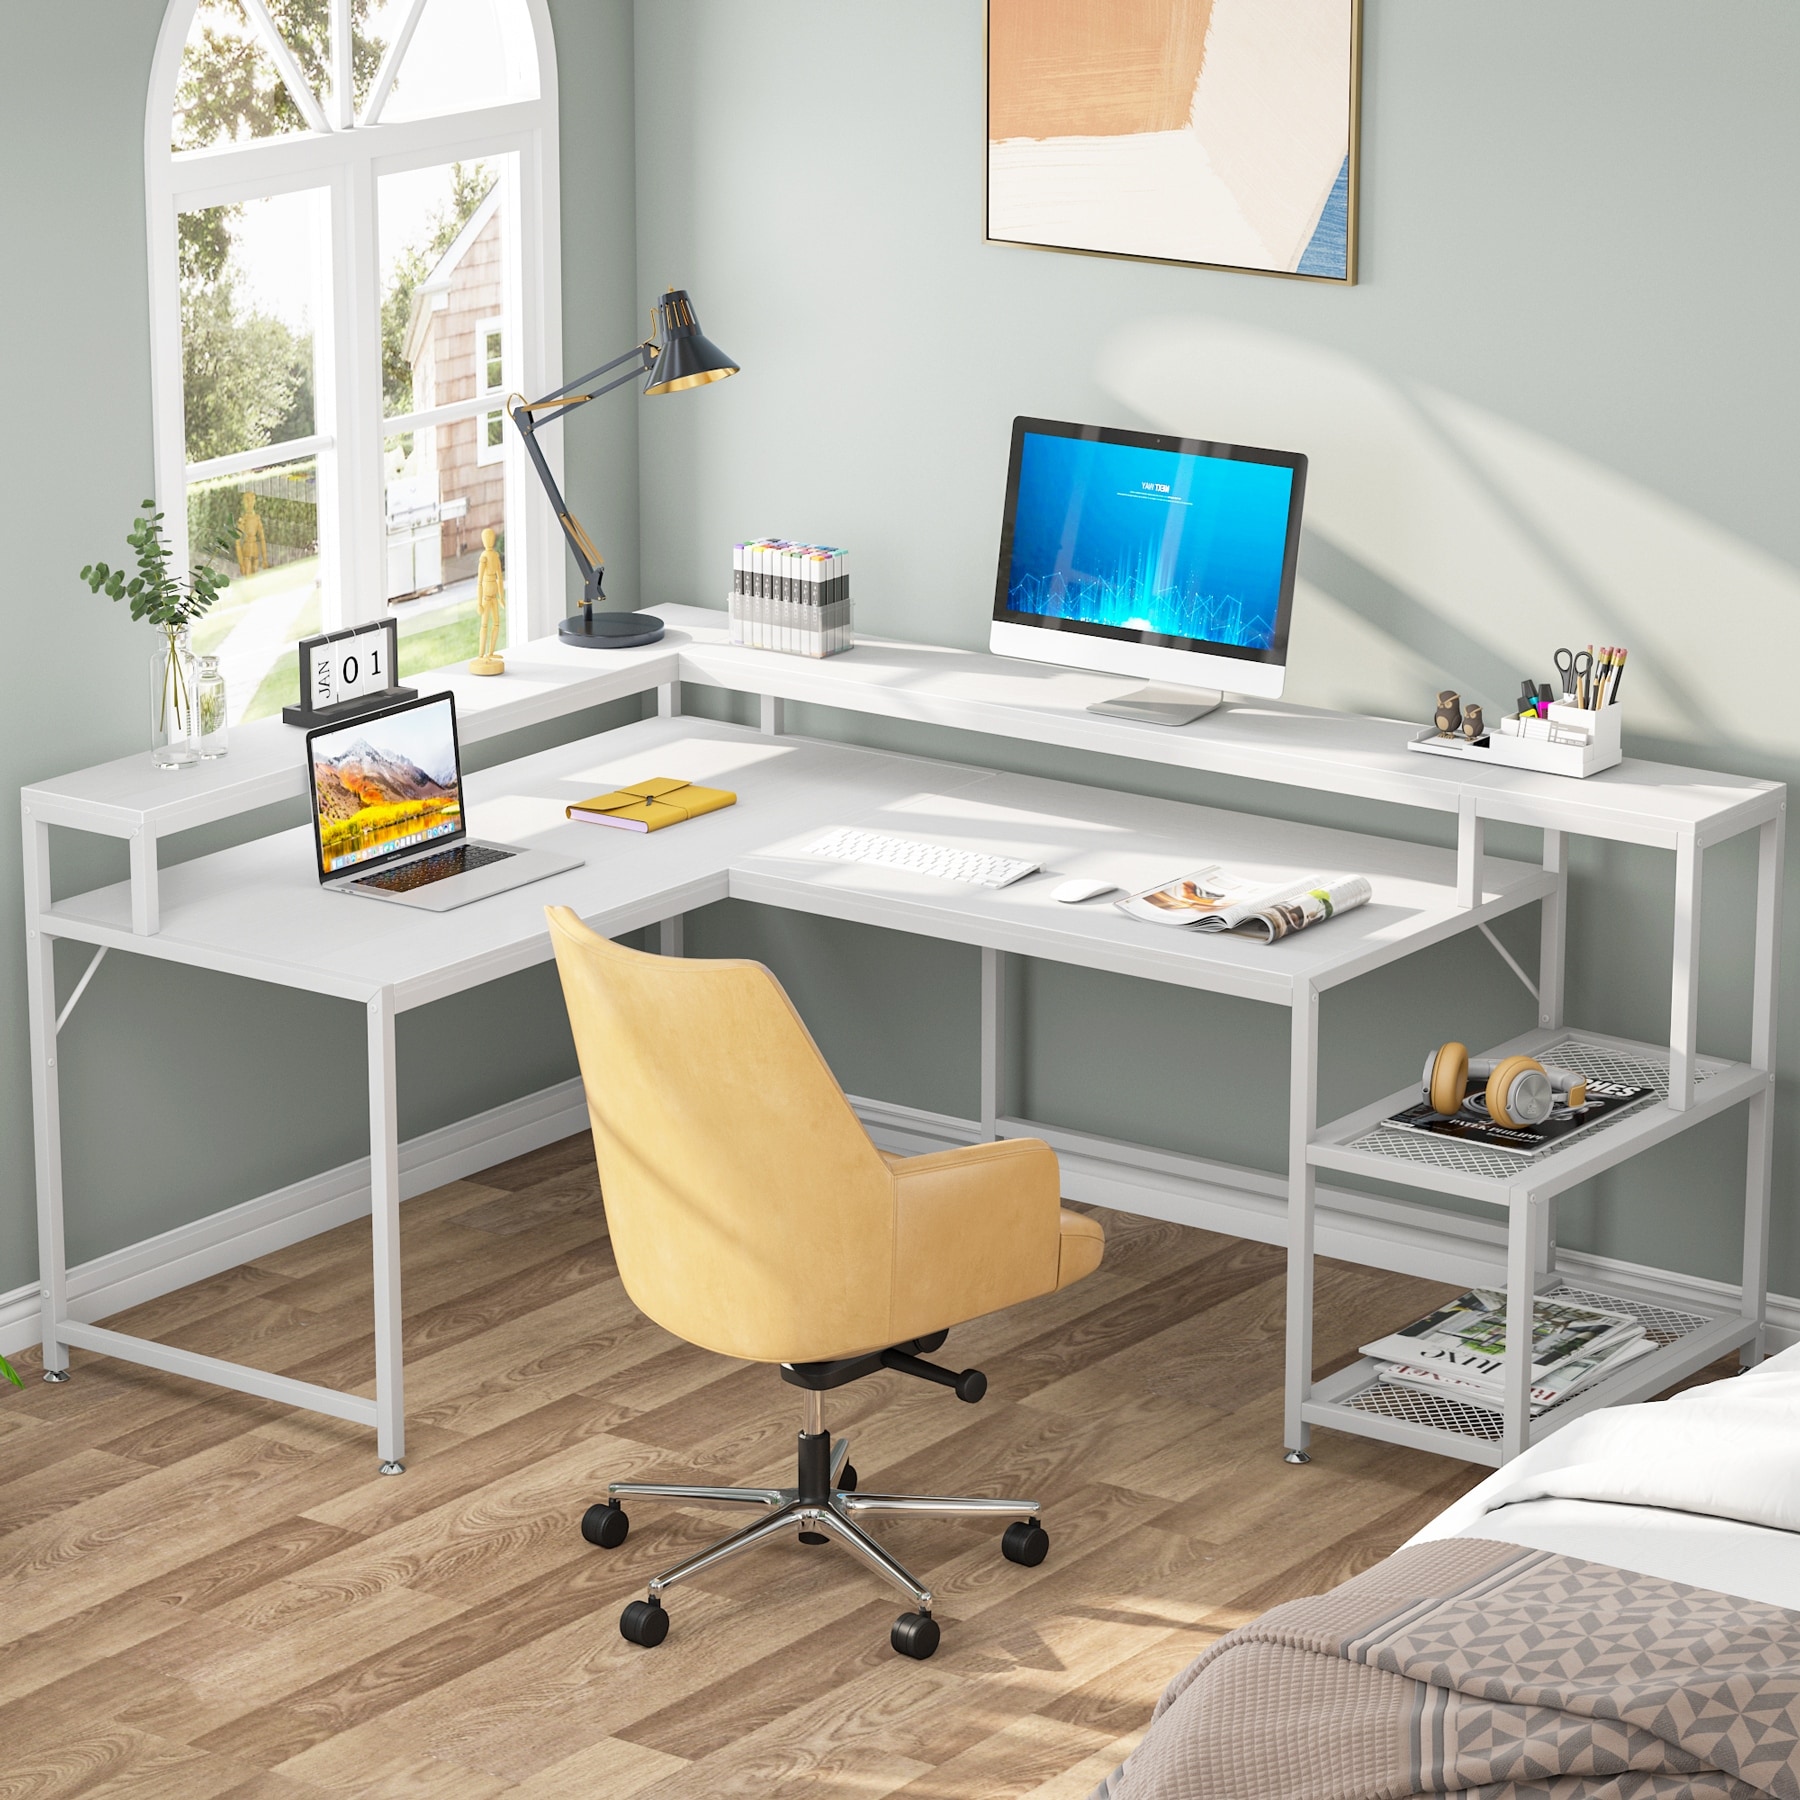 https://ak1.ostkcdn.com/images/products/is/images/direct/ac0324cf7338fa207949fa8627c653f906879133/69%22-L-Shaped-Desk-with-Monitor-Shelf%2C-Reversible-Corner-Computer-Desk-for-Office-Home.jpg